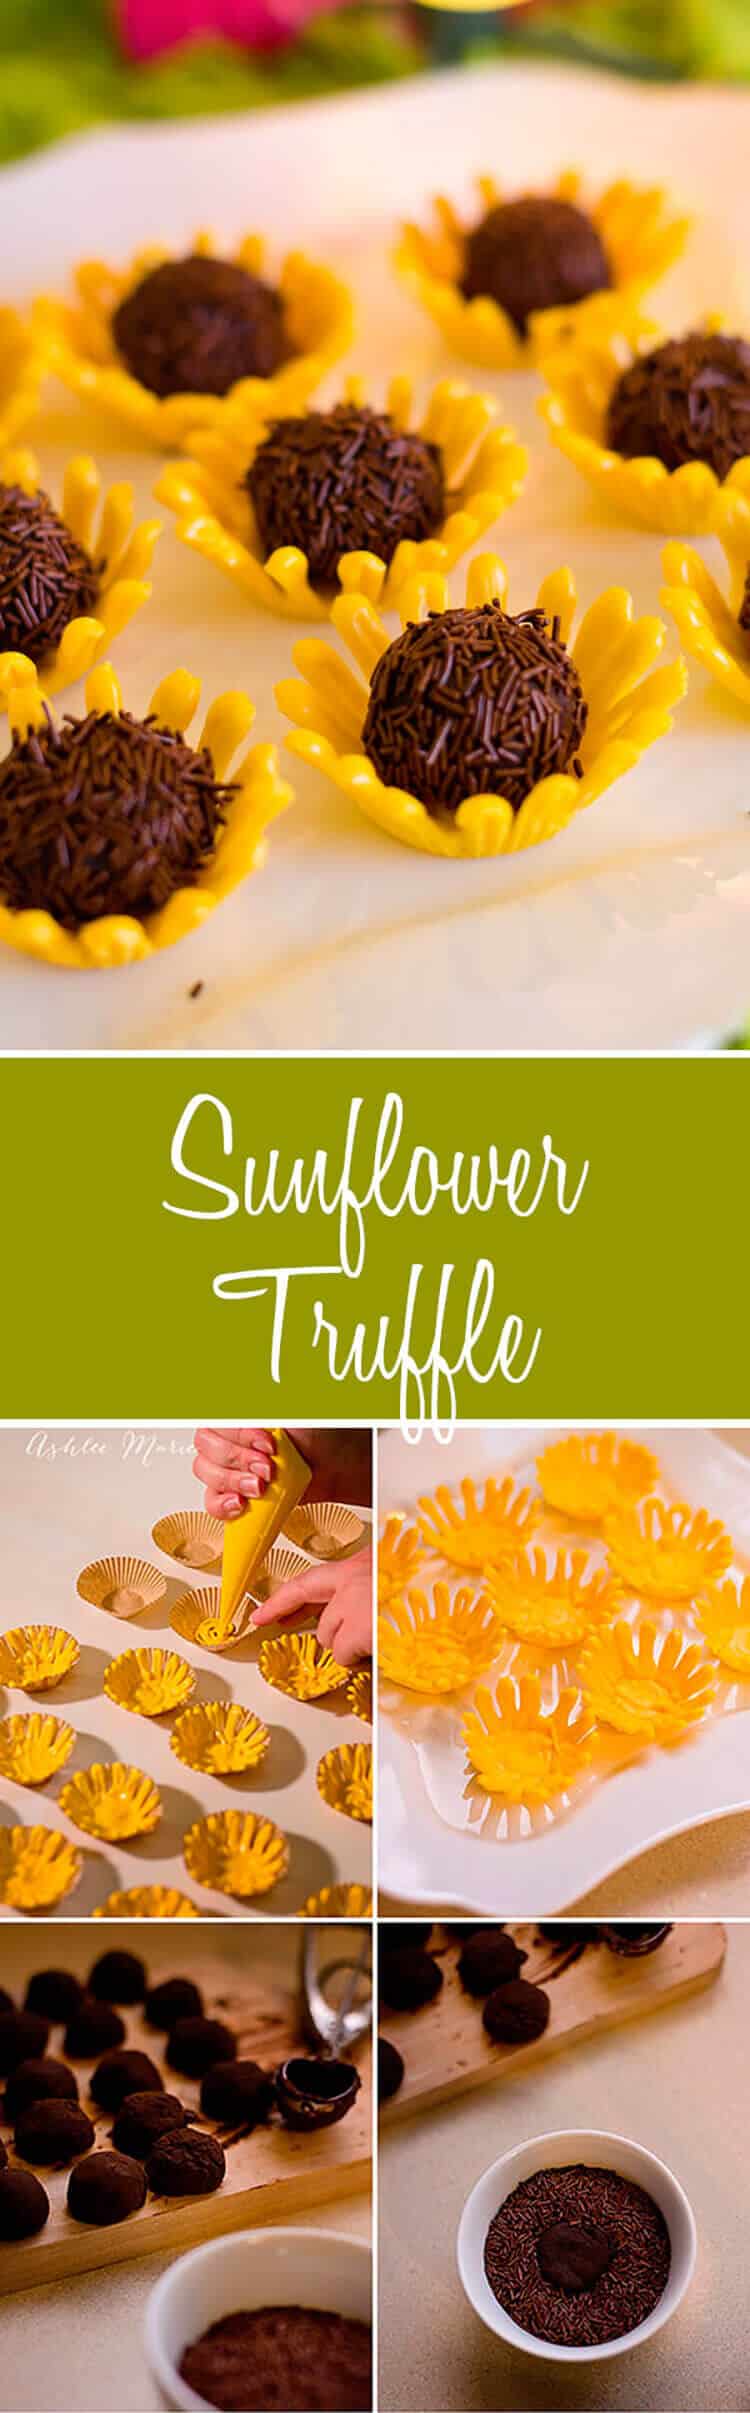 Chocolate sunflower truffles in a candy bowl